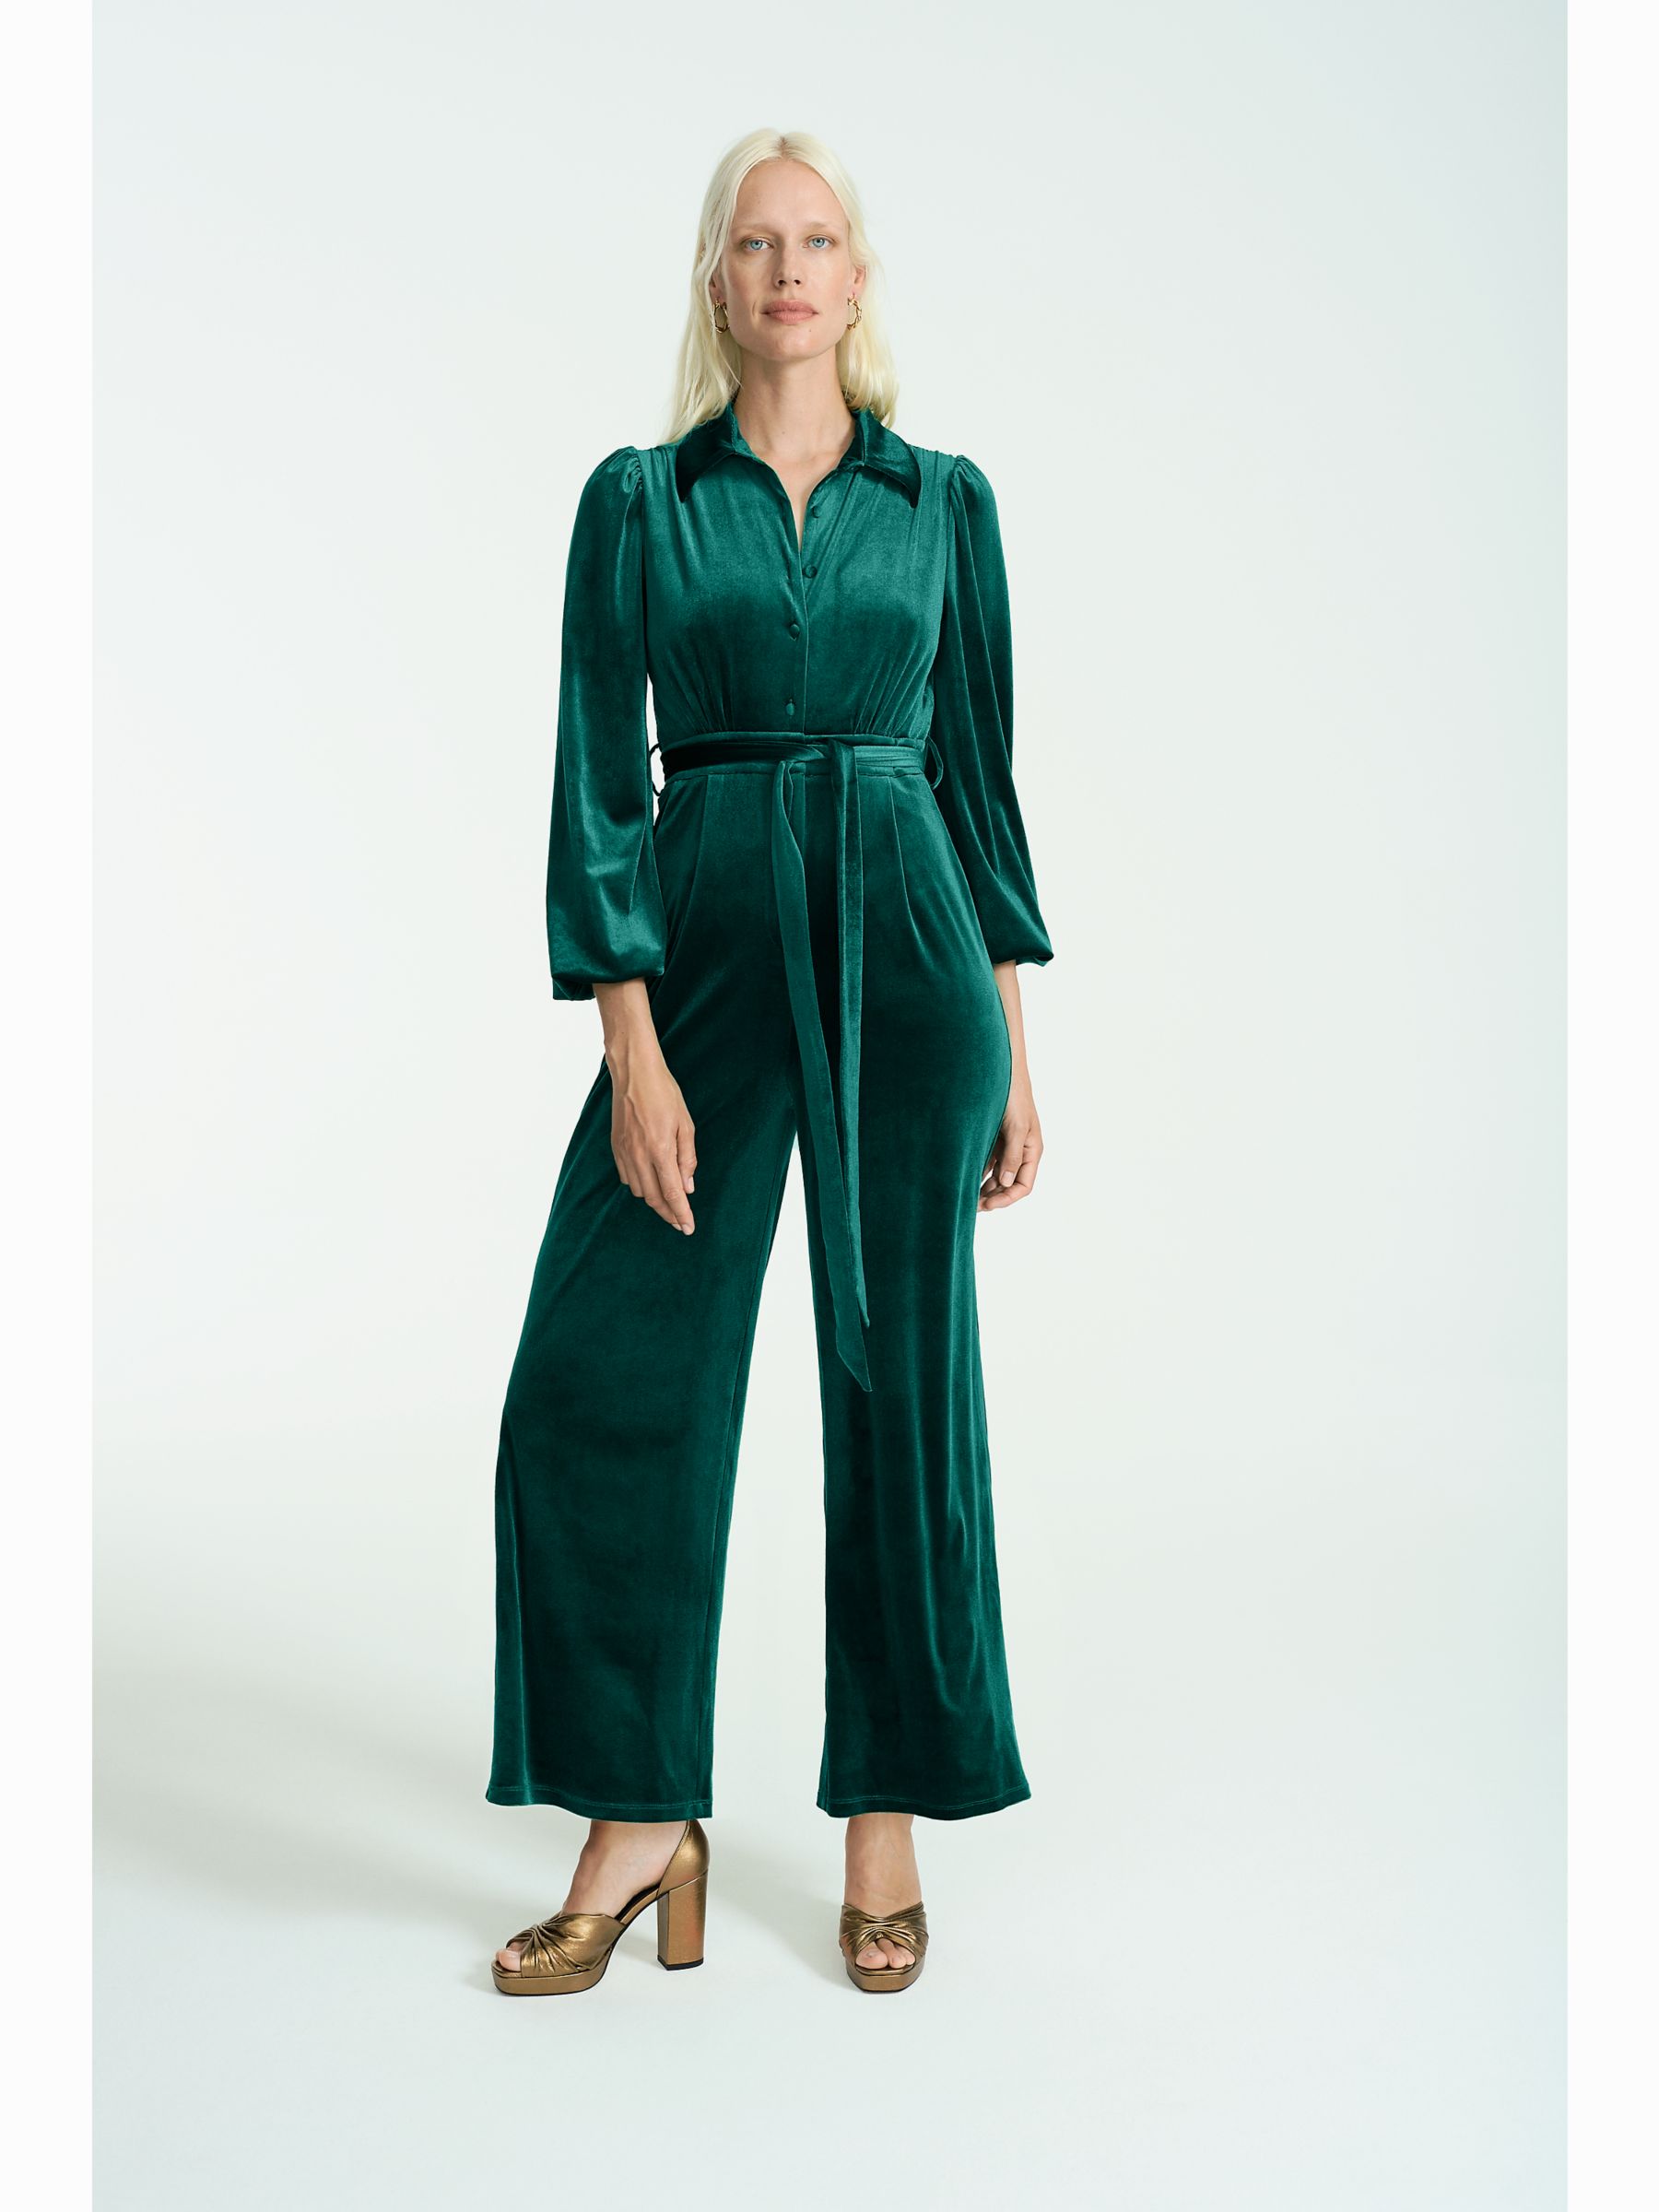 Luxurious Emerald Green Velvet Jumpsuit - Holiday Party – Shop the